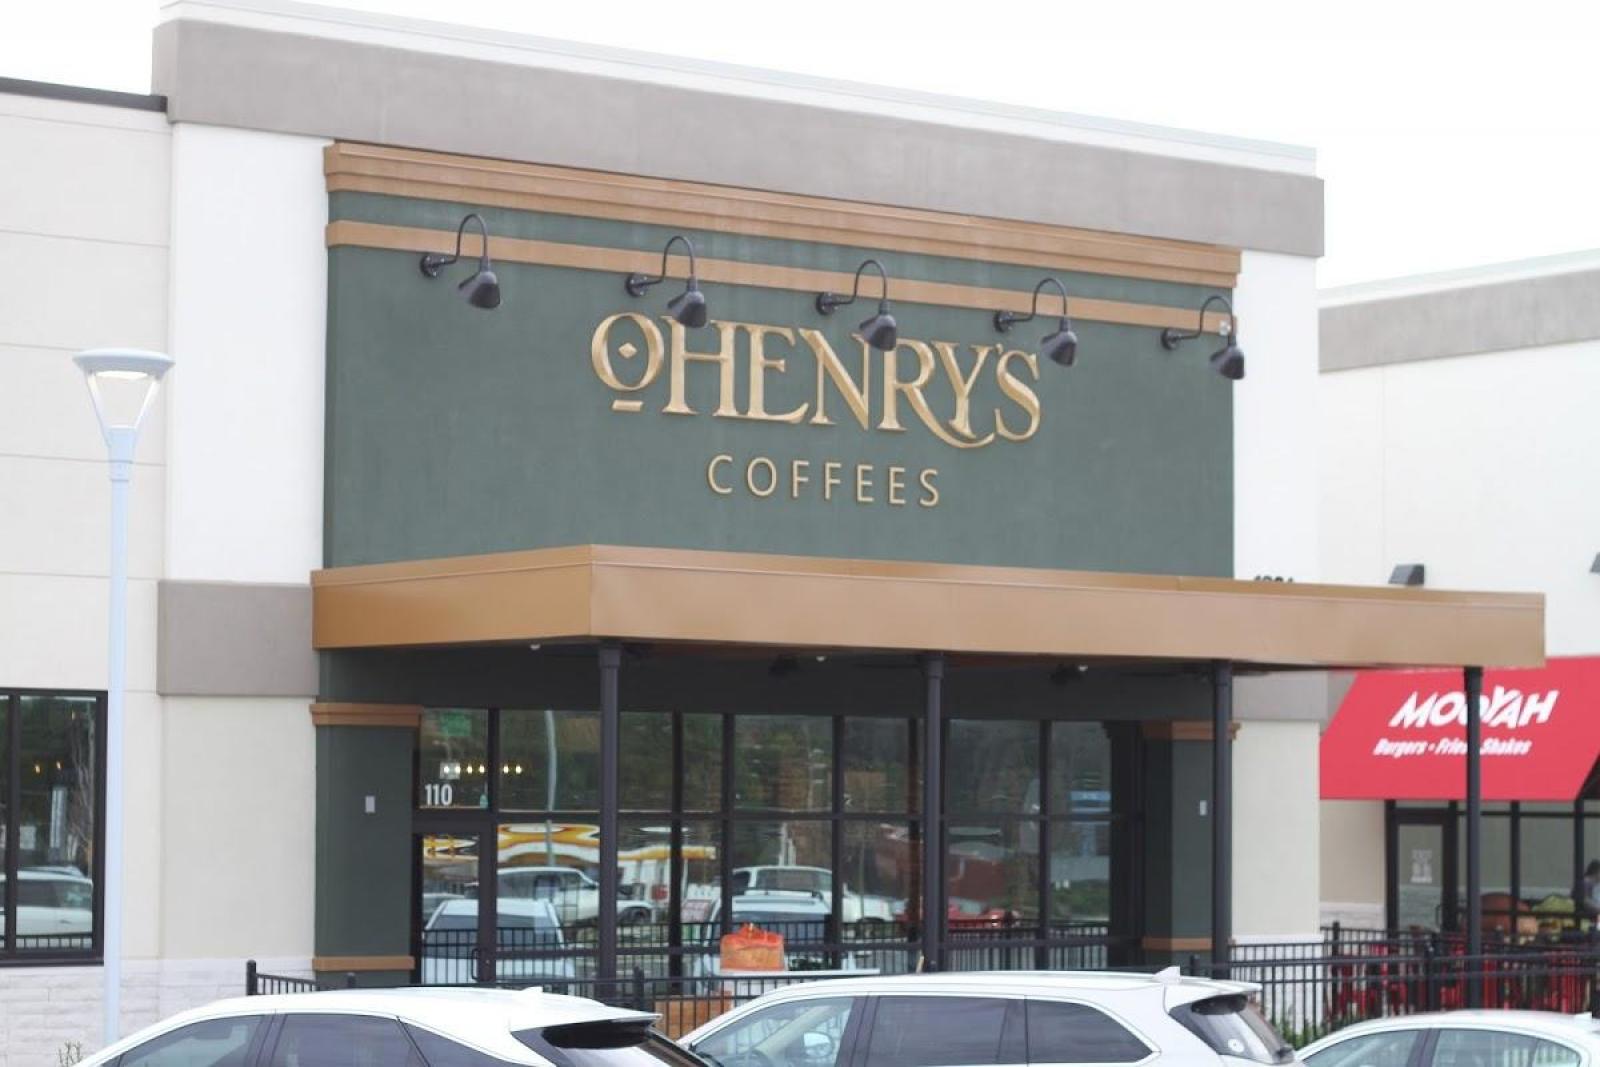 OHenry's Coffees in Hoover